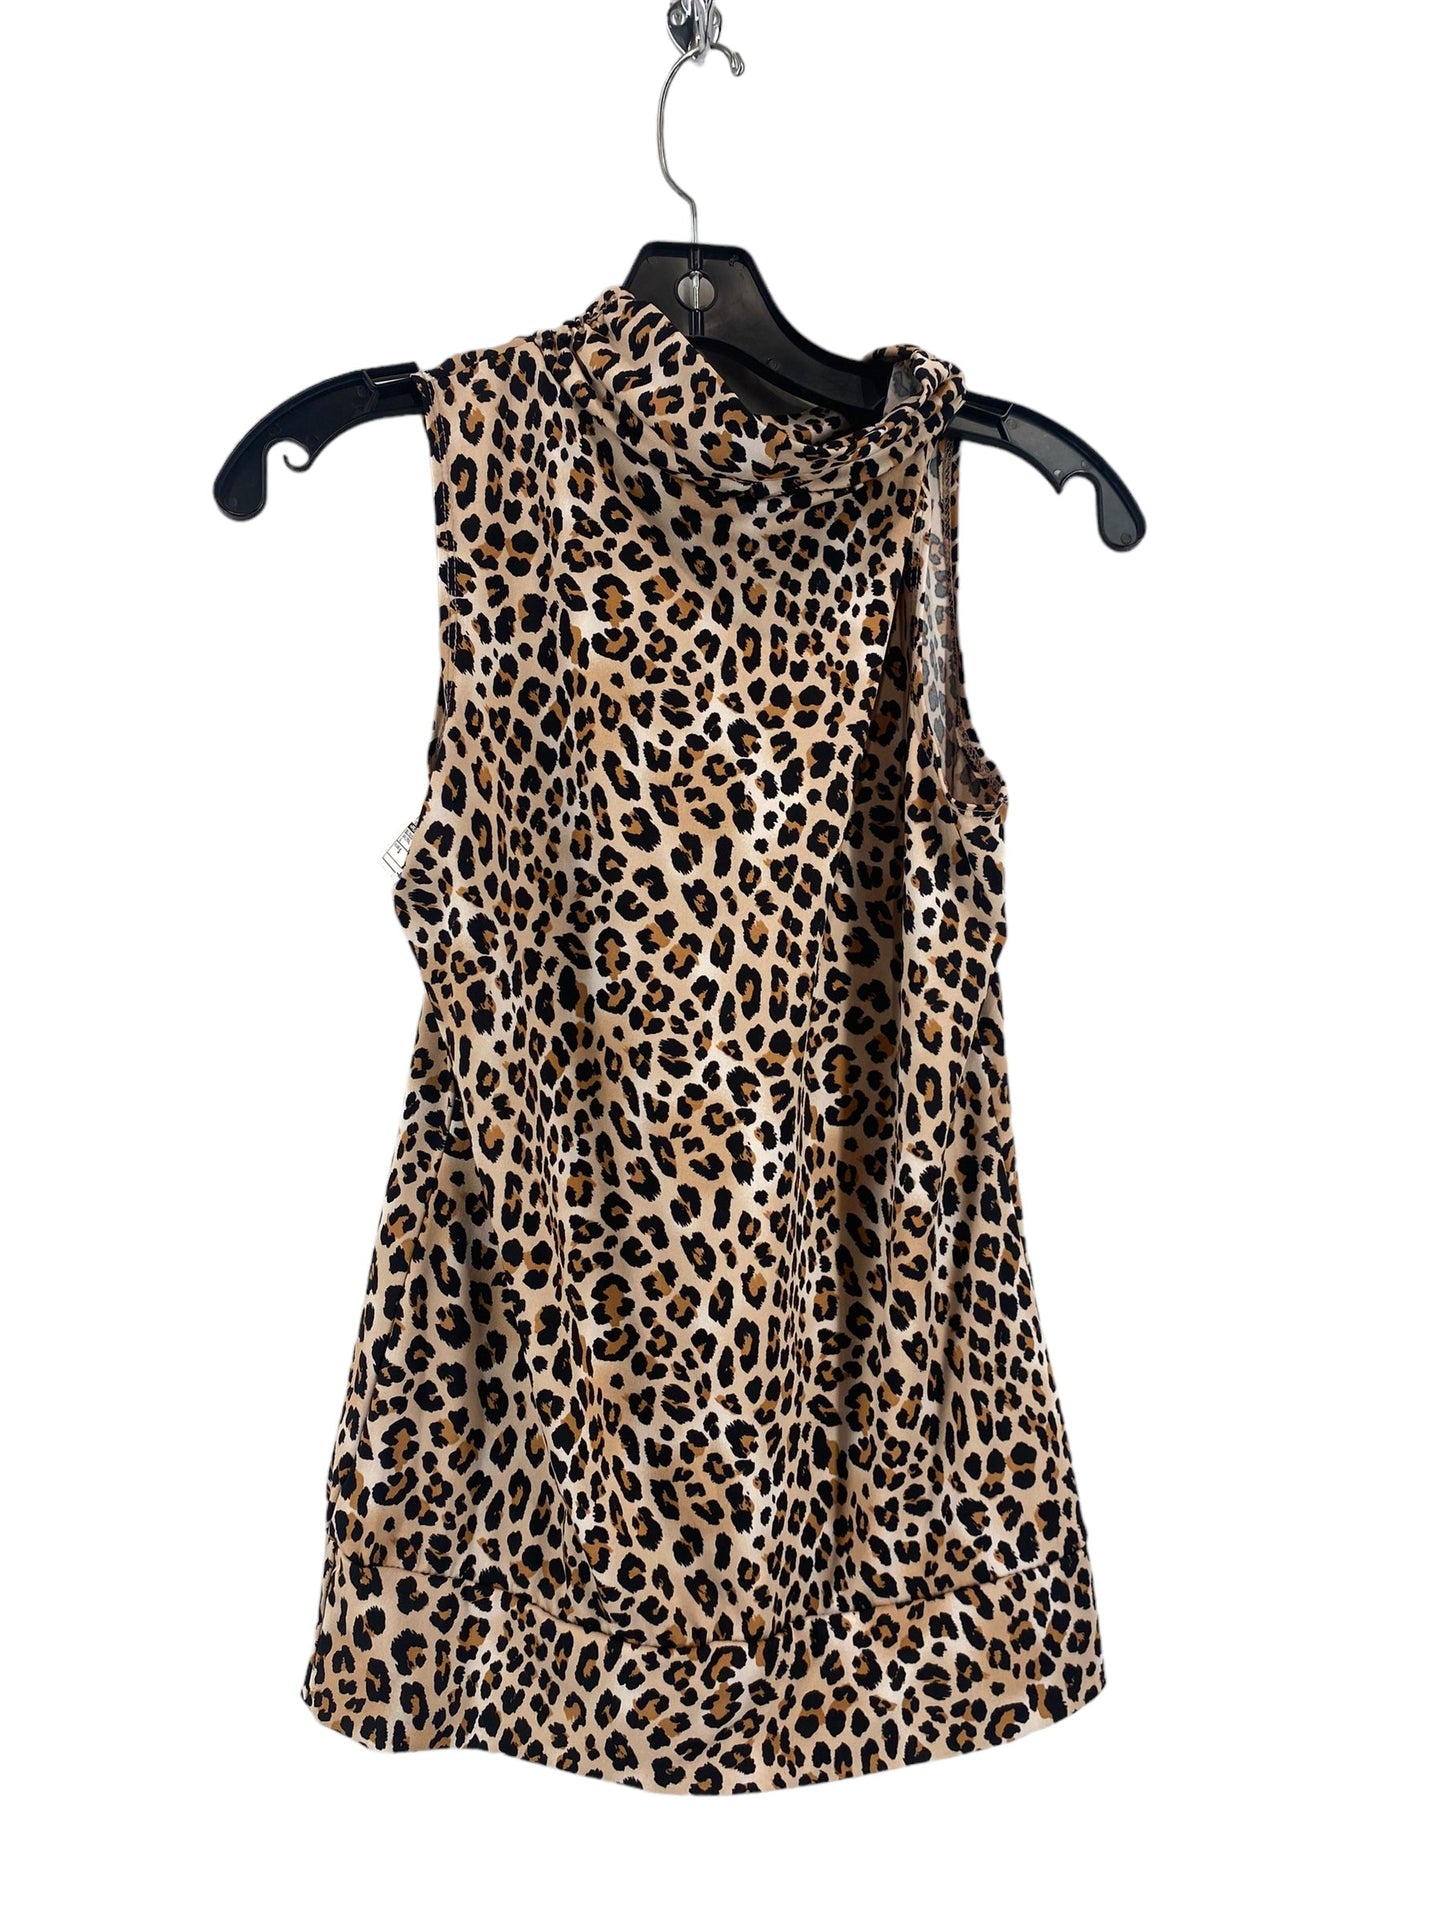 Animal Print Blouse Sleeveless Perseption Concept, Size S